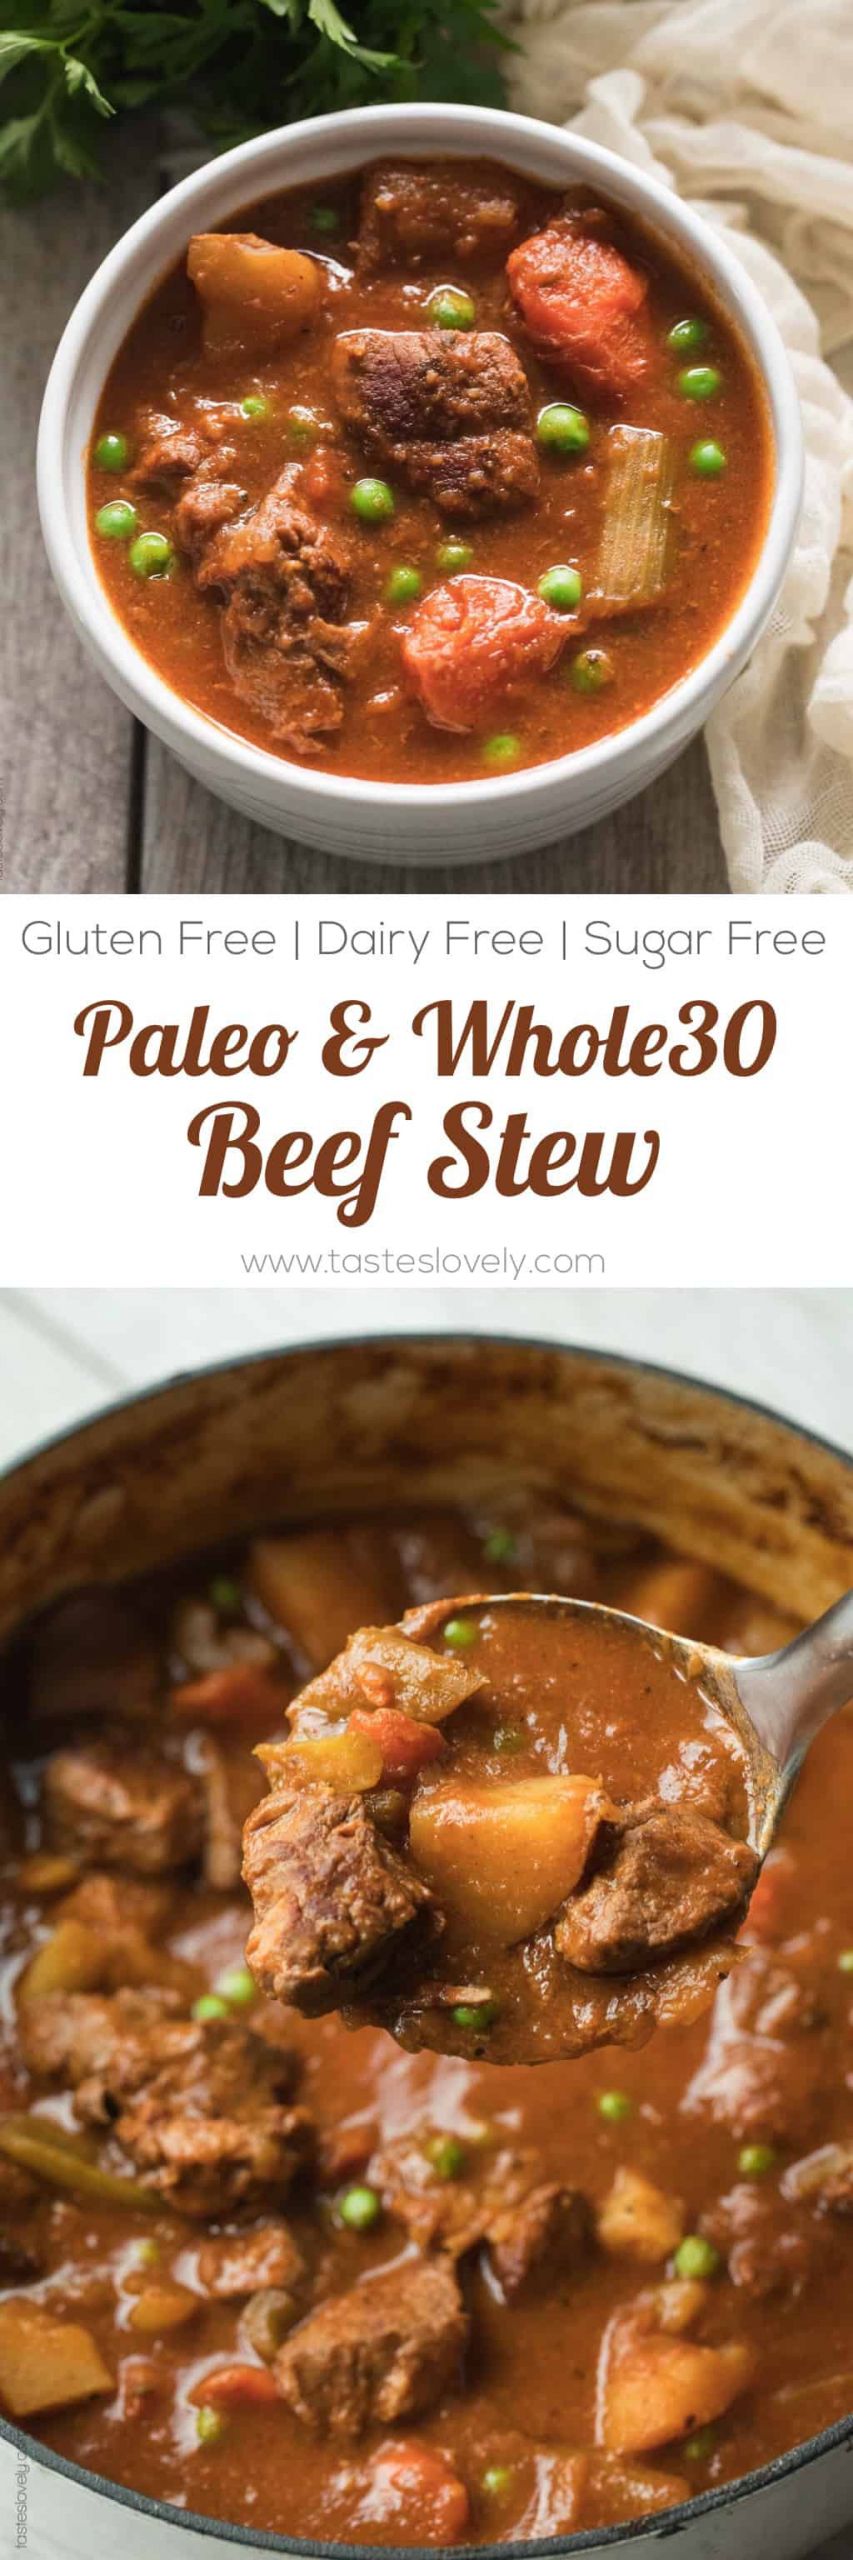 Paleo Stew Recipes
 Paleo & Whole30 Beef Stew Slow Cooker or Dutch Oven